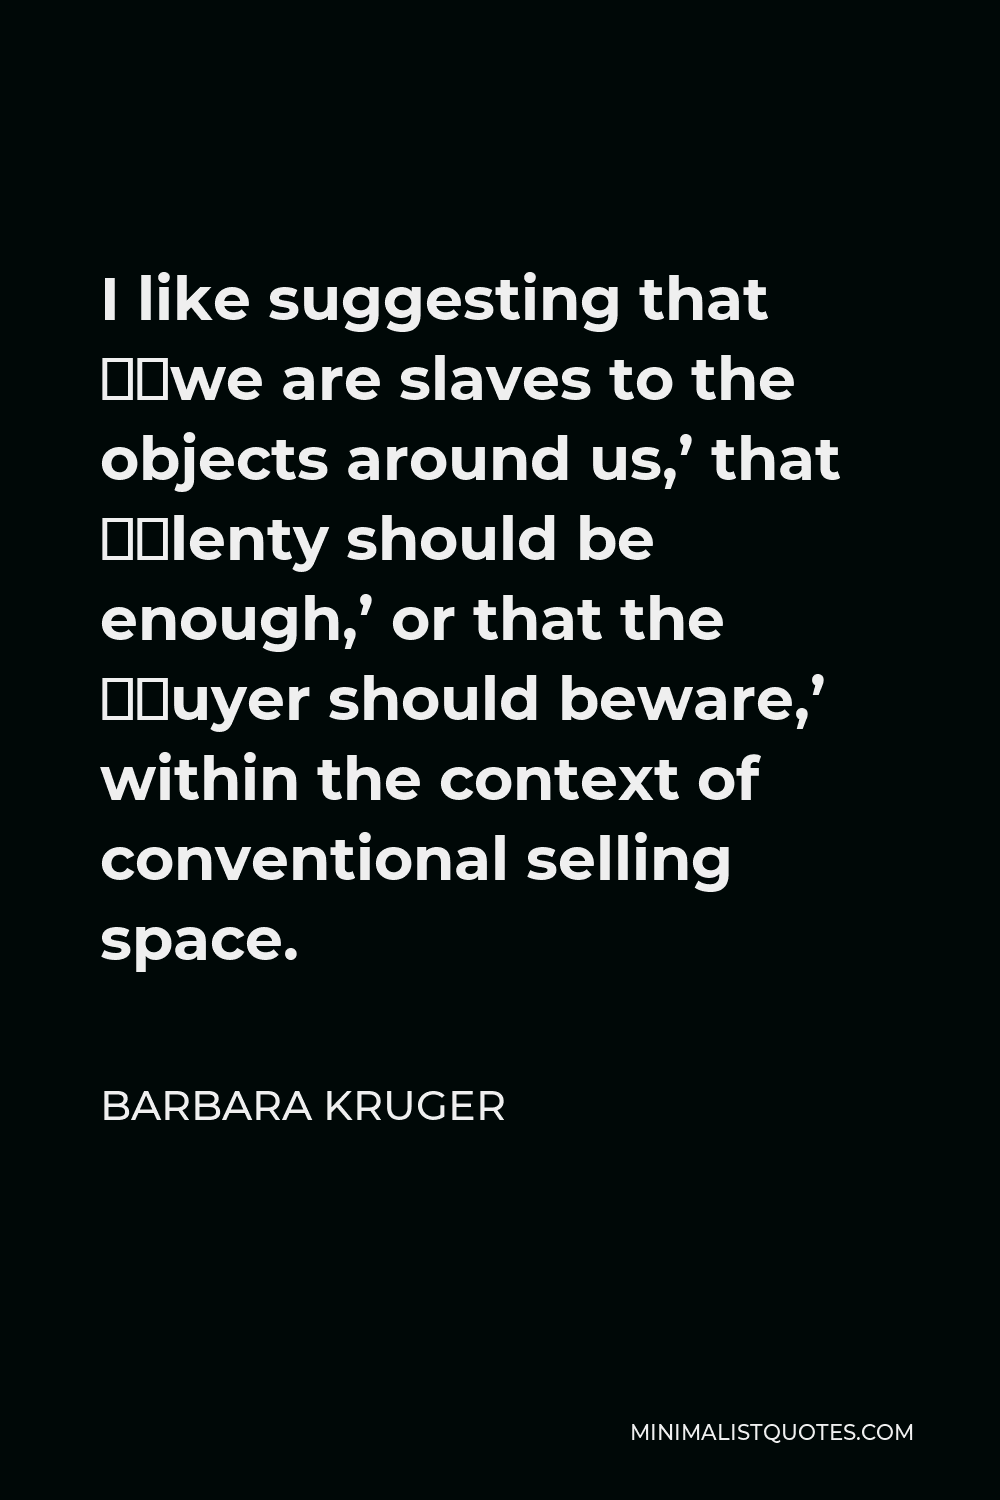 Barbara Kruger Quote - I like suggesting that ‘we are slaves to the objects around us,’ that ‘plenty should be enough,’ or that the ‘buyer should beware,’ within the context of conventional selling space.